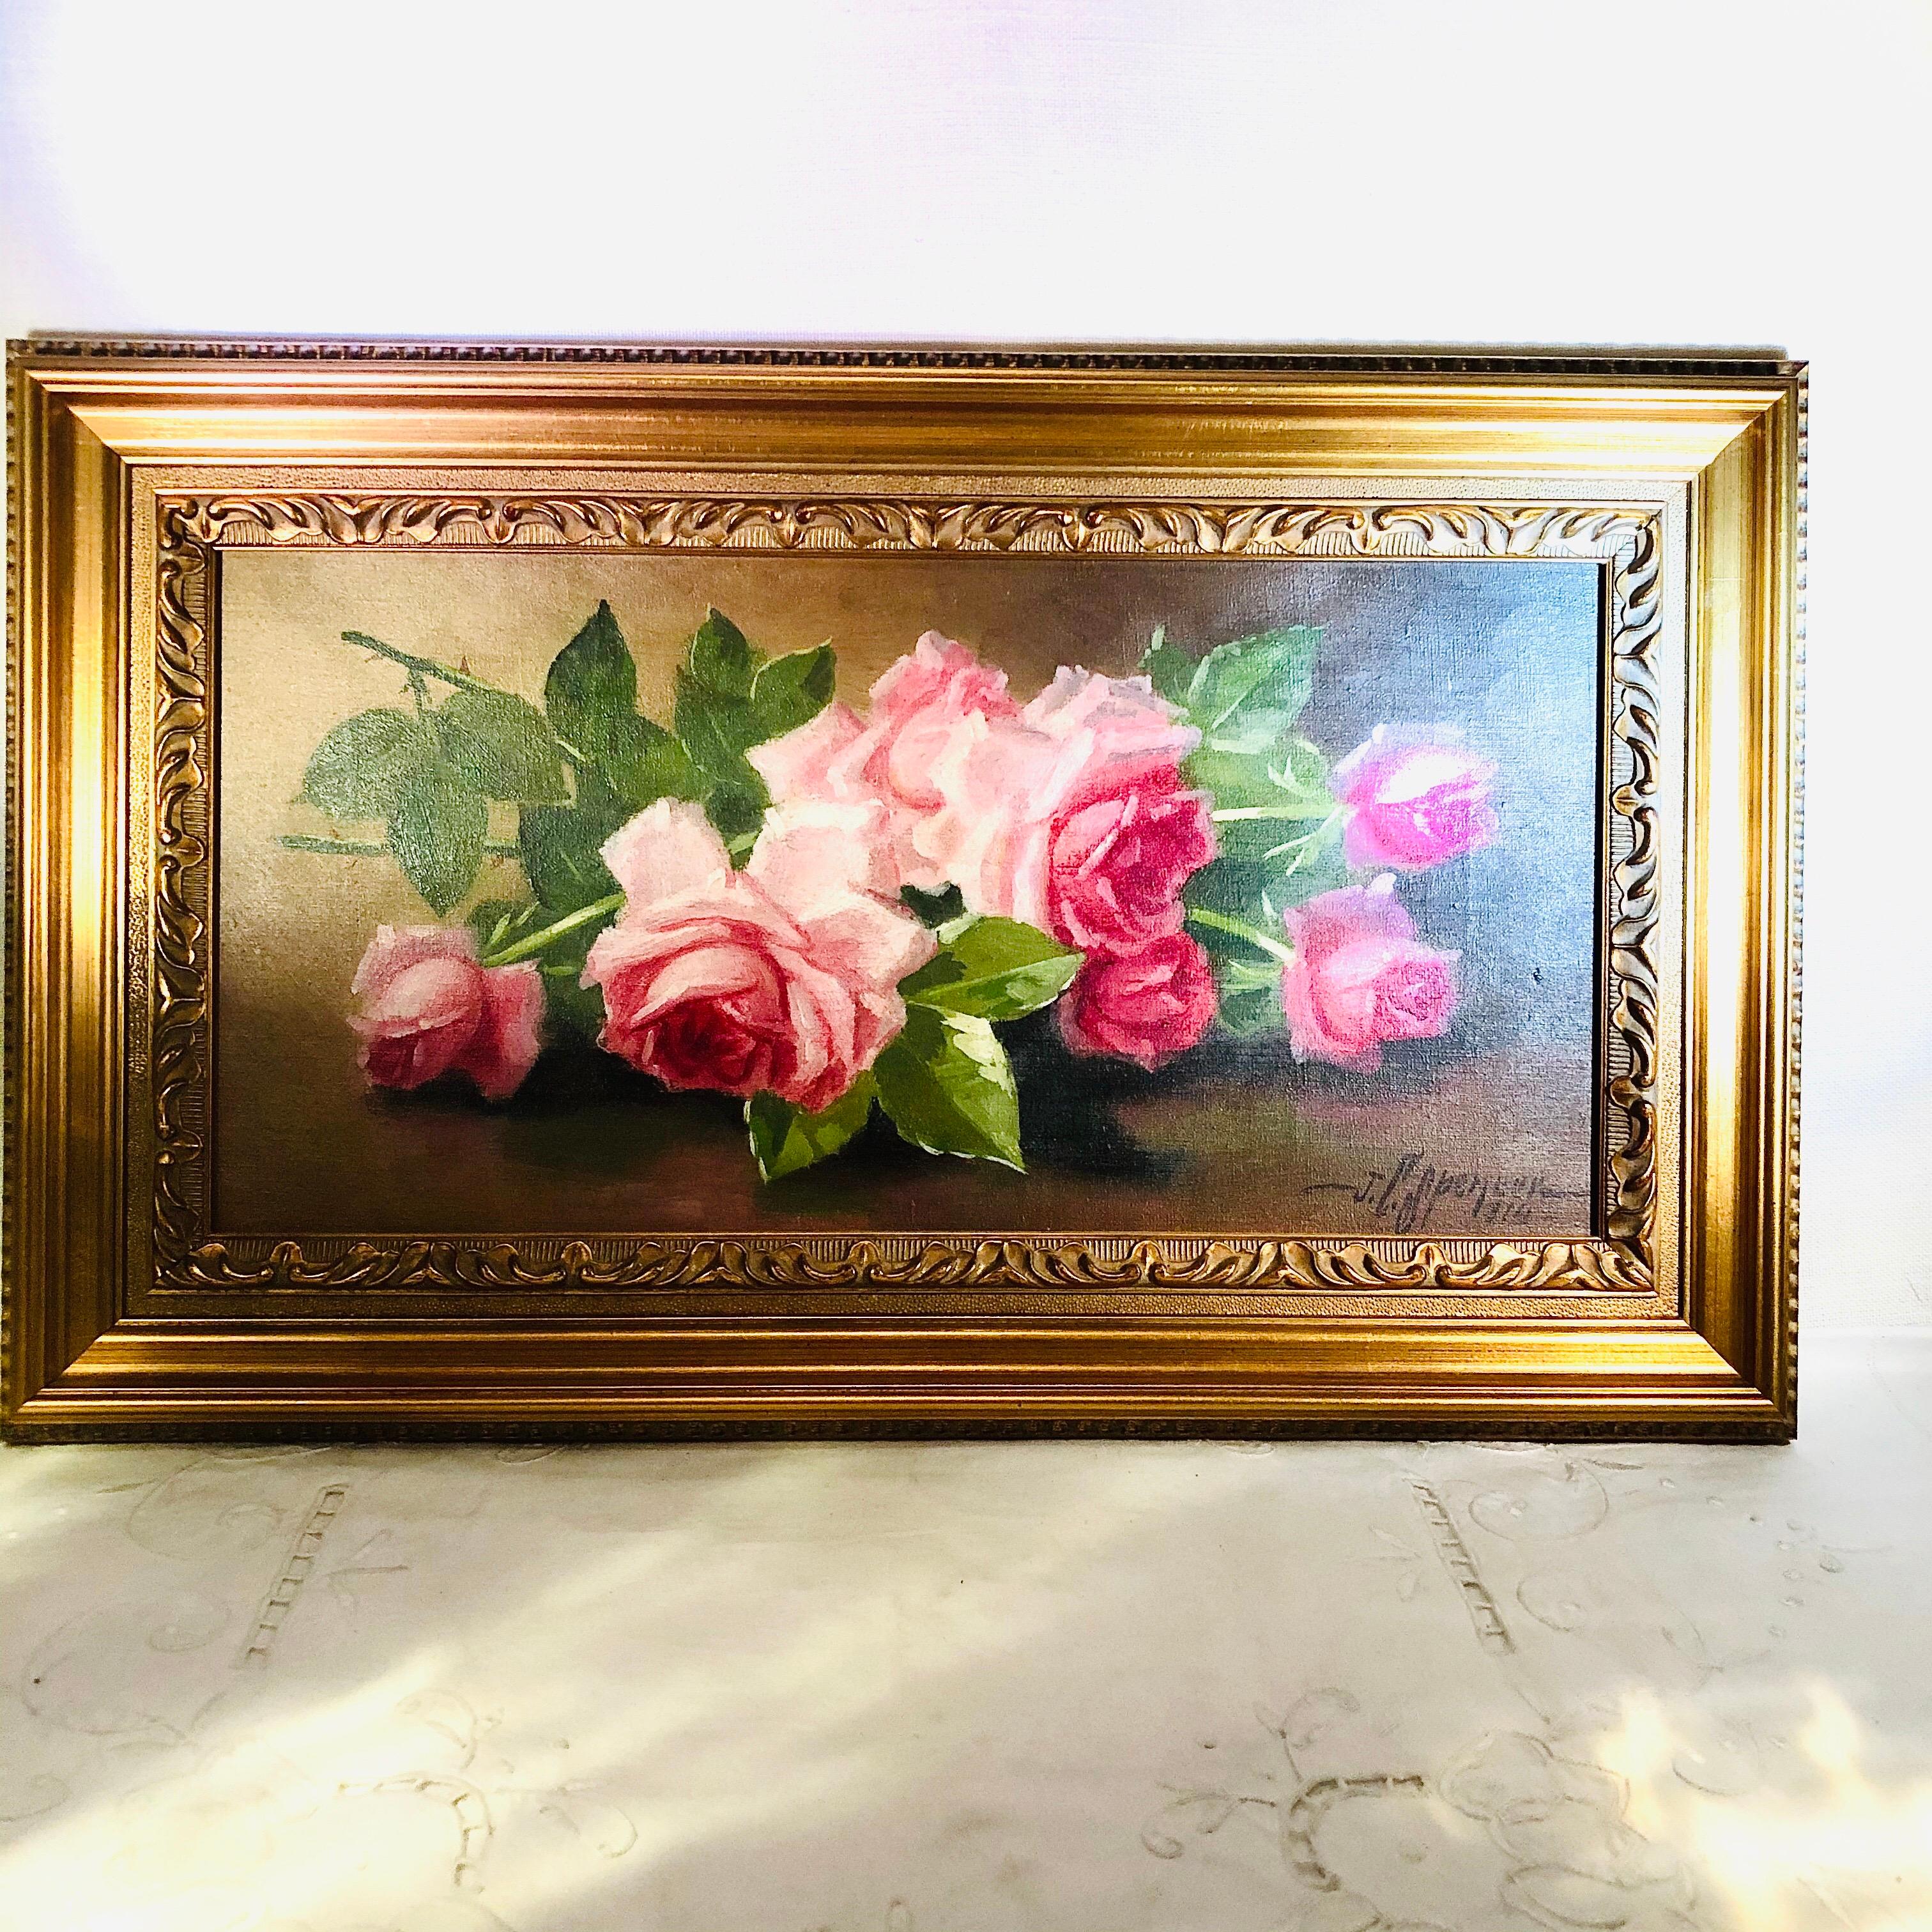 American Oil on Canvas of Pink Roses Signed J. C. Spencer and Dated 1916